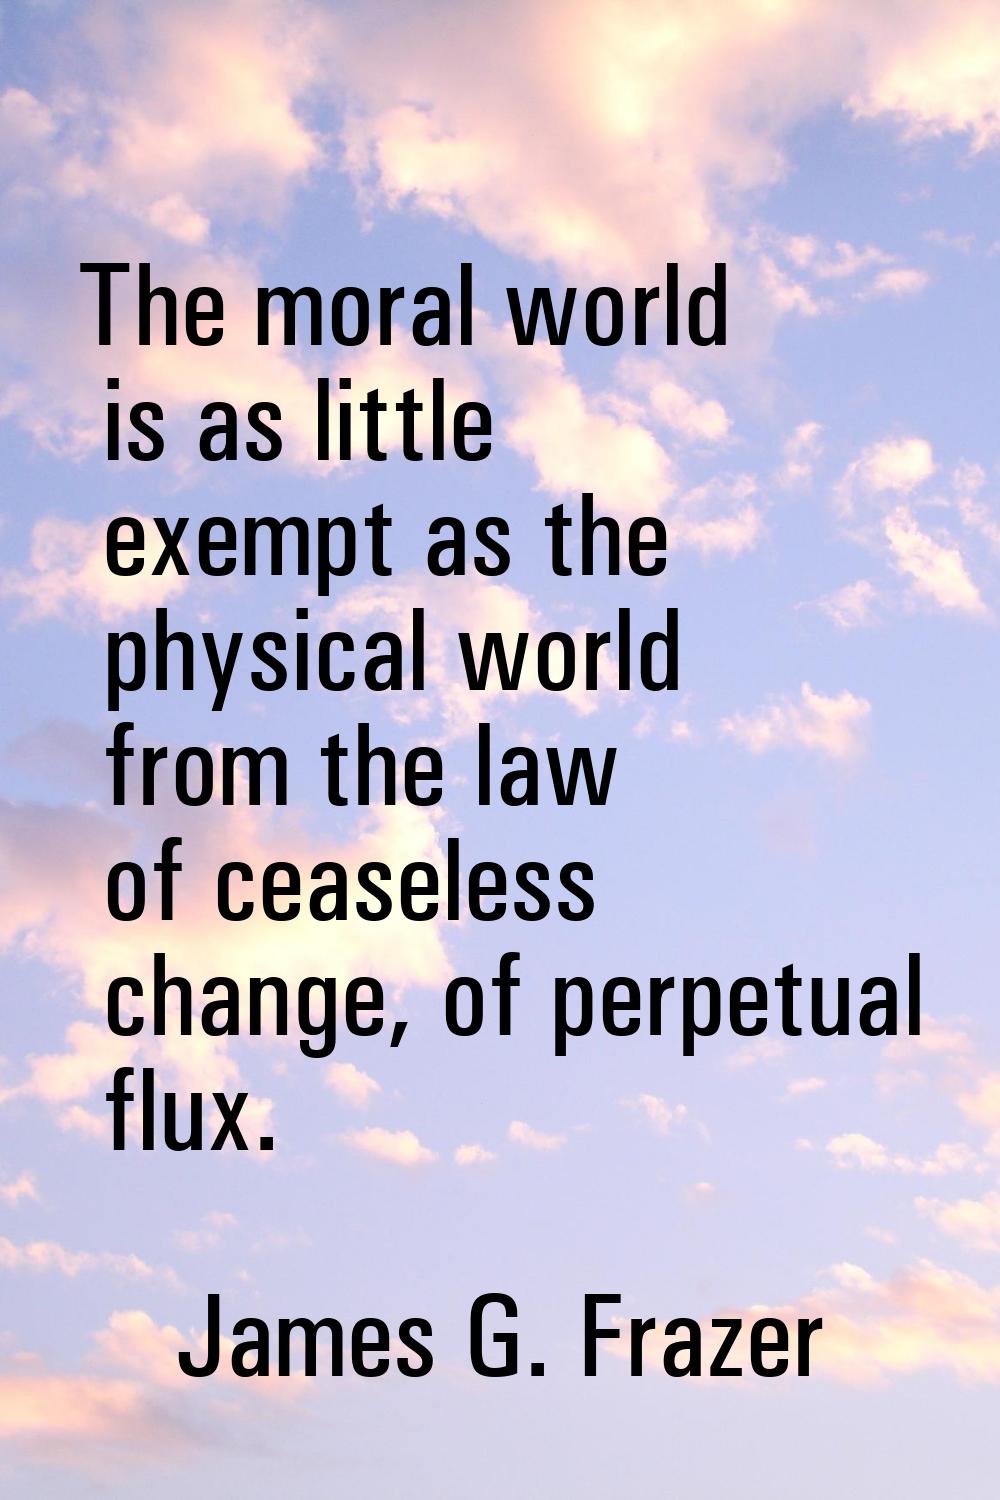 The moral world is as little exempt as the physical world from the law of ceaseless change, of perp